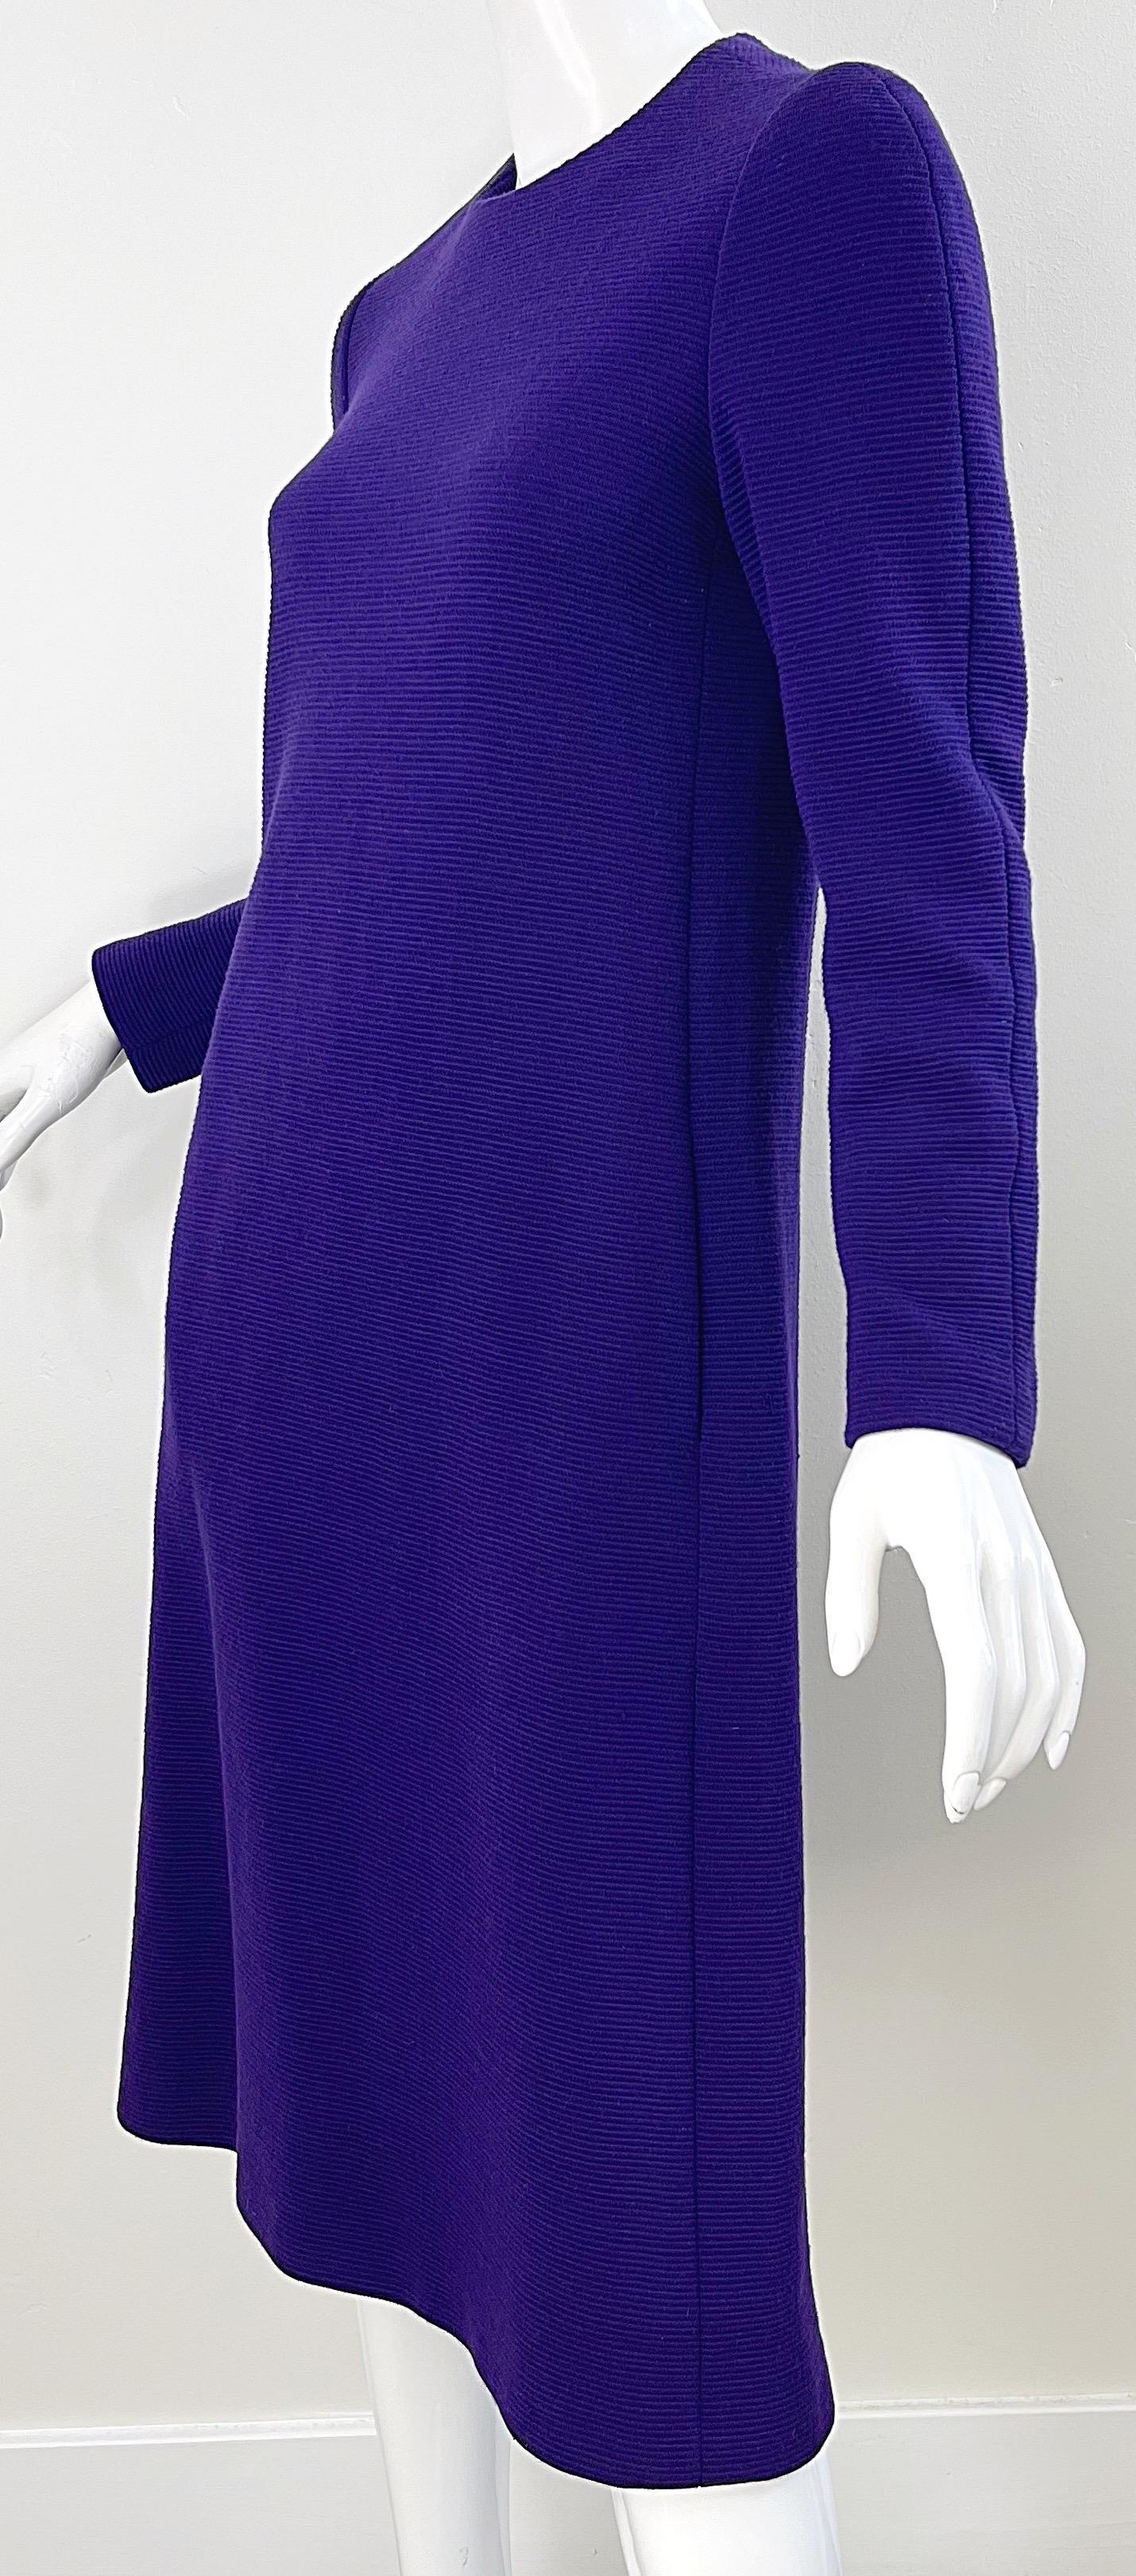 1970s Halston Purple Wool Long Sleeve Vintage Chic 70s Tailored Dress For Sale 6